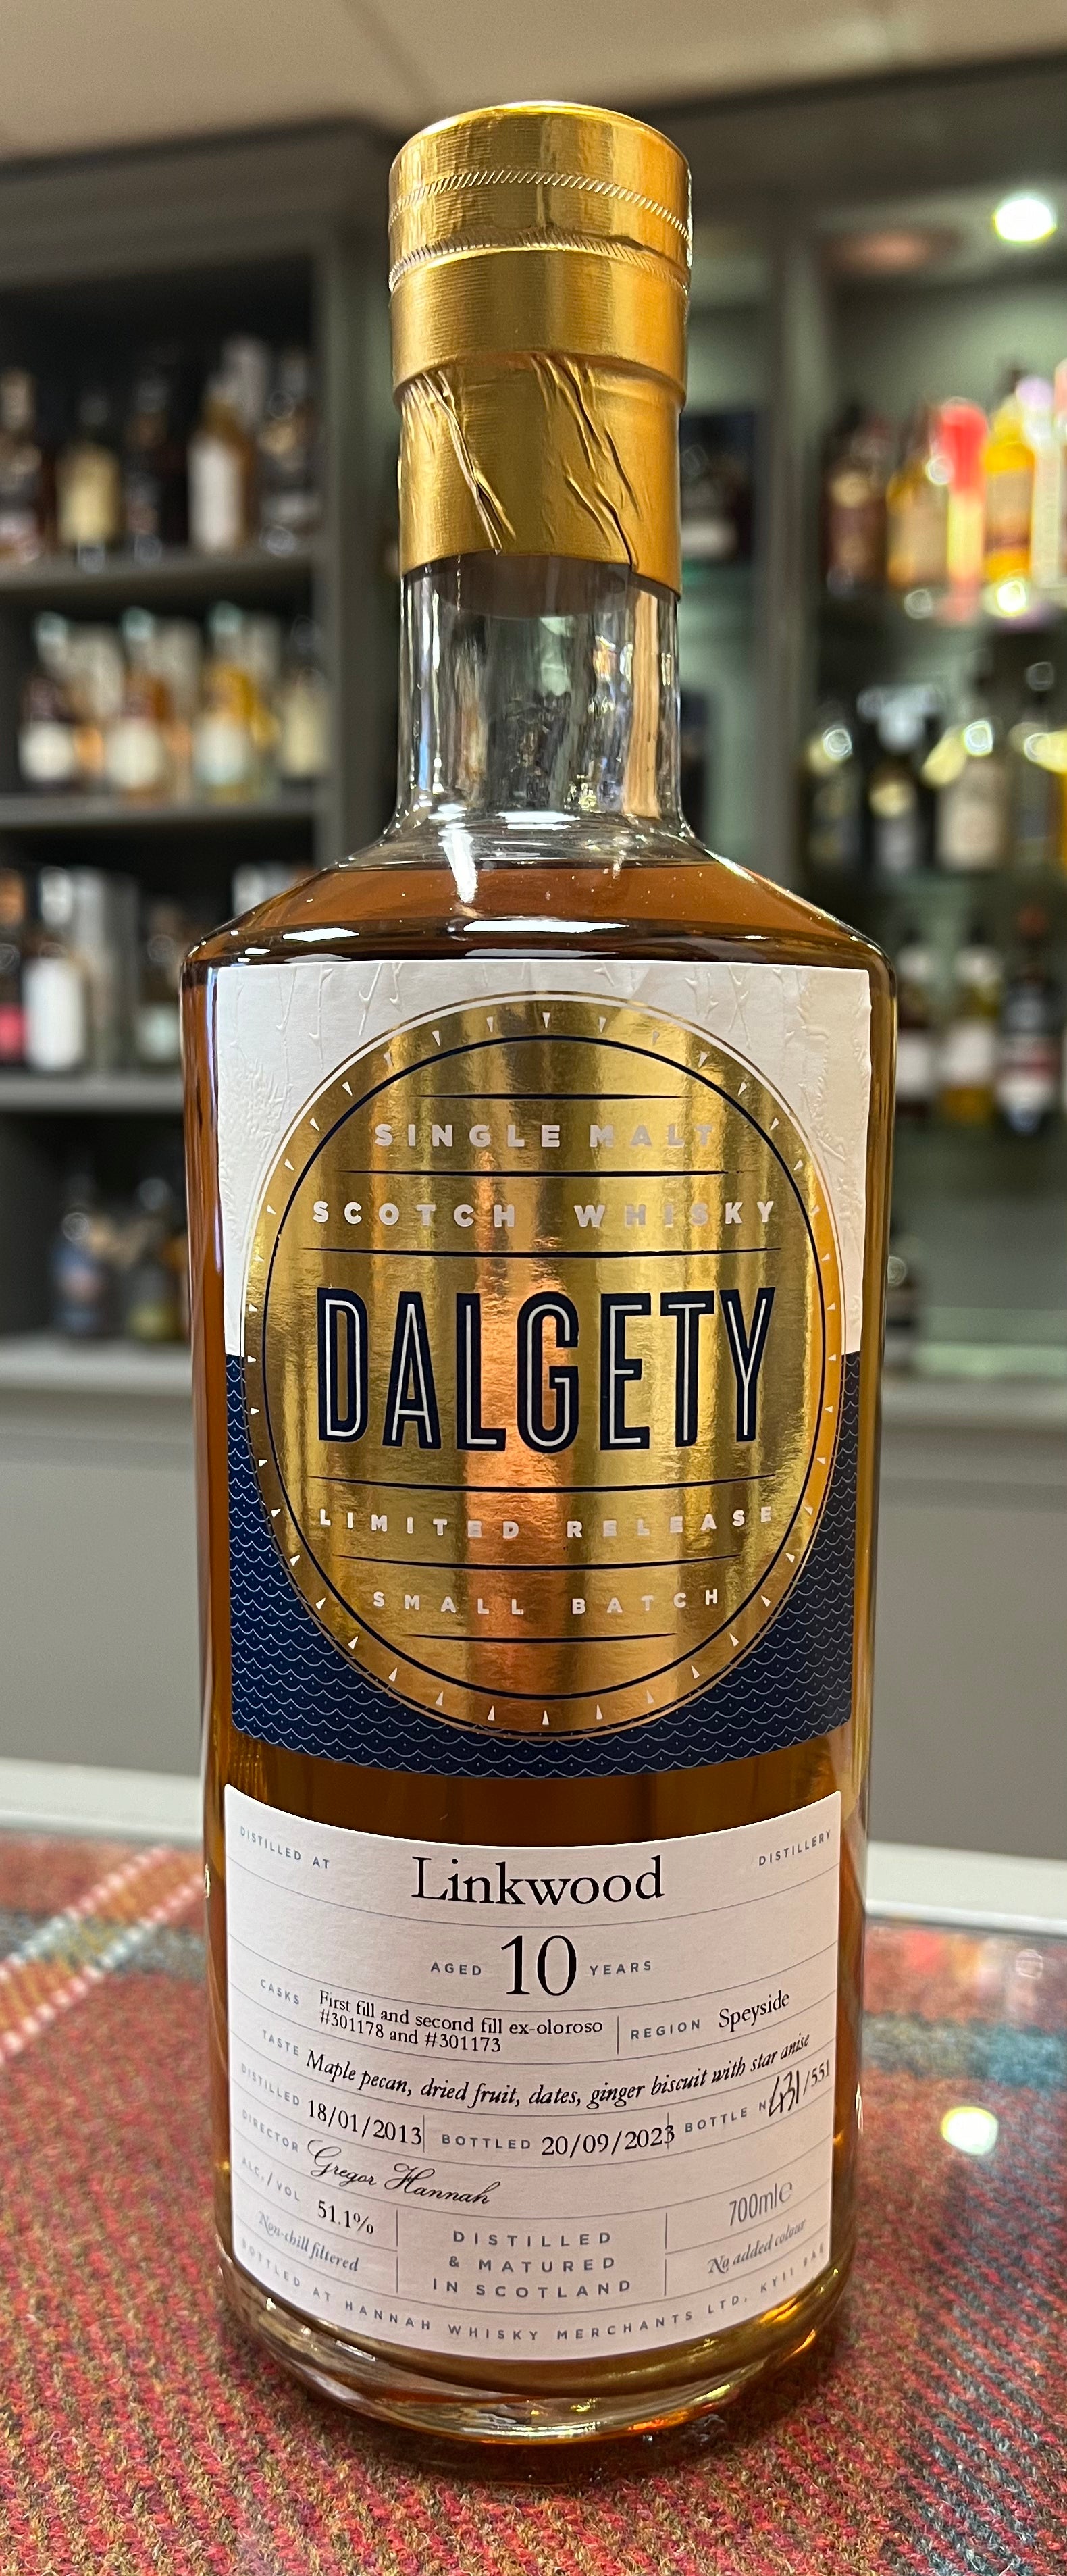 Lady of the Glen: Dalgety Bay Linkwood 10yo finished in First & Second Fill Ex Oloroso Casks (70cl, 50.6%)